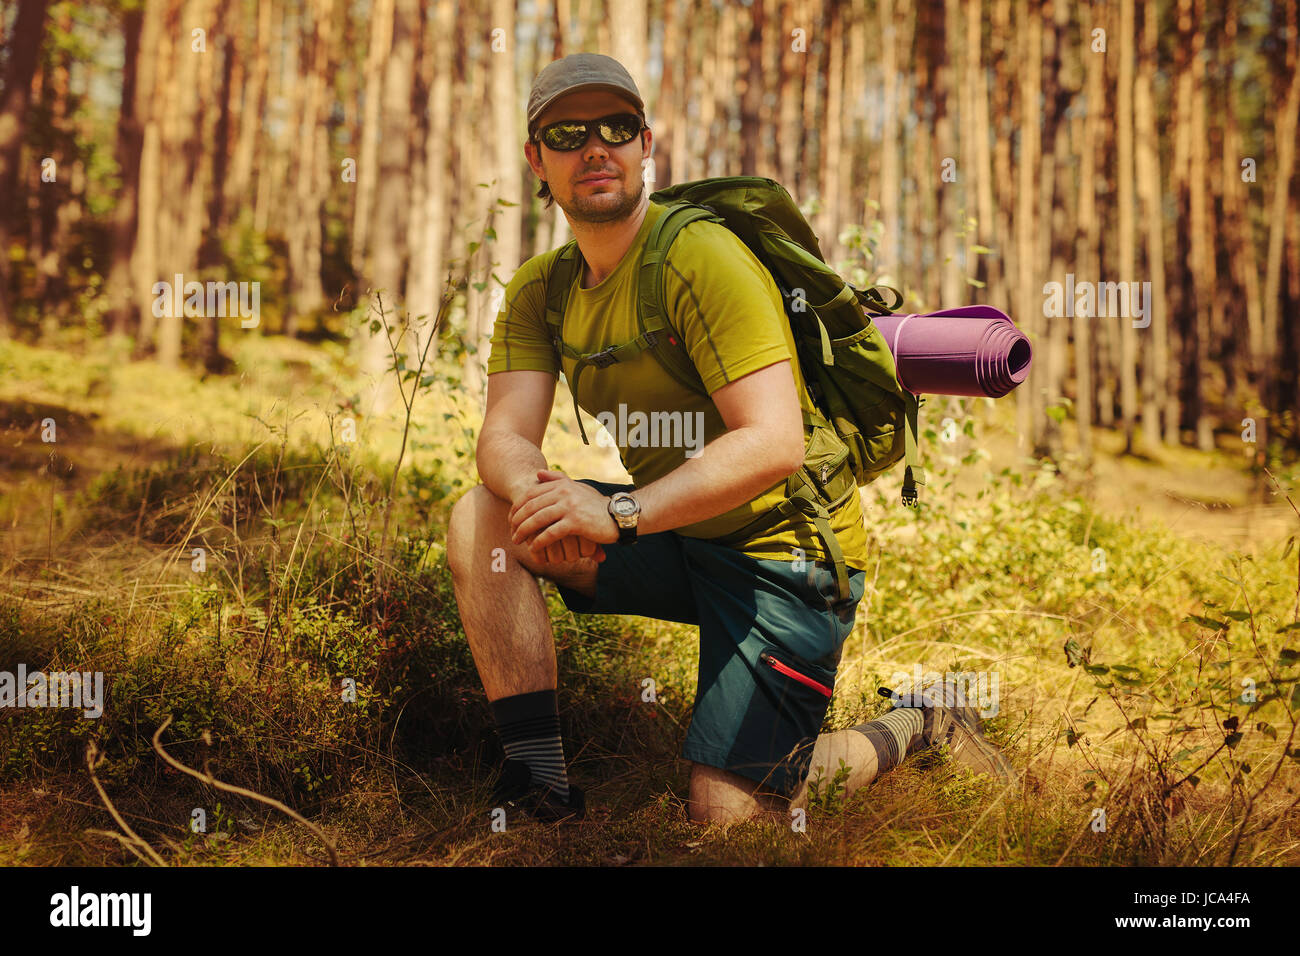 Young man tourist with sunglasses and backpack portrait in forest Stock Photo